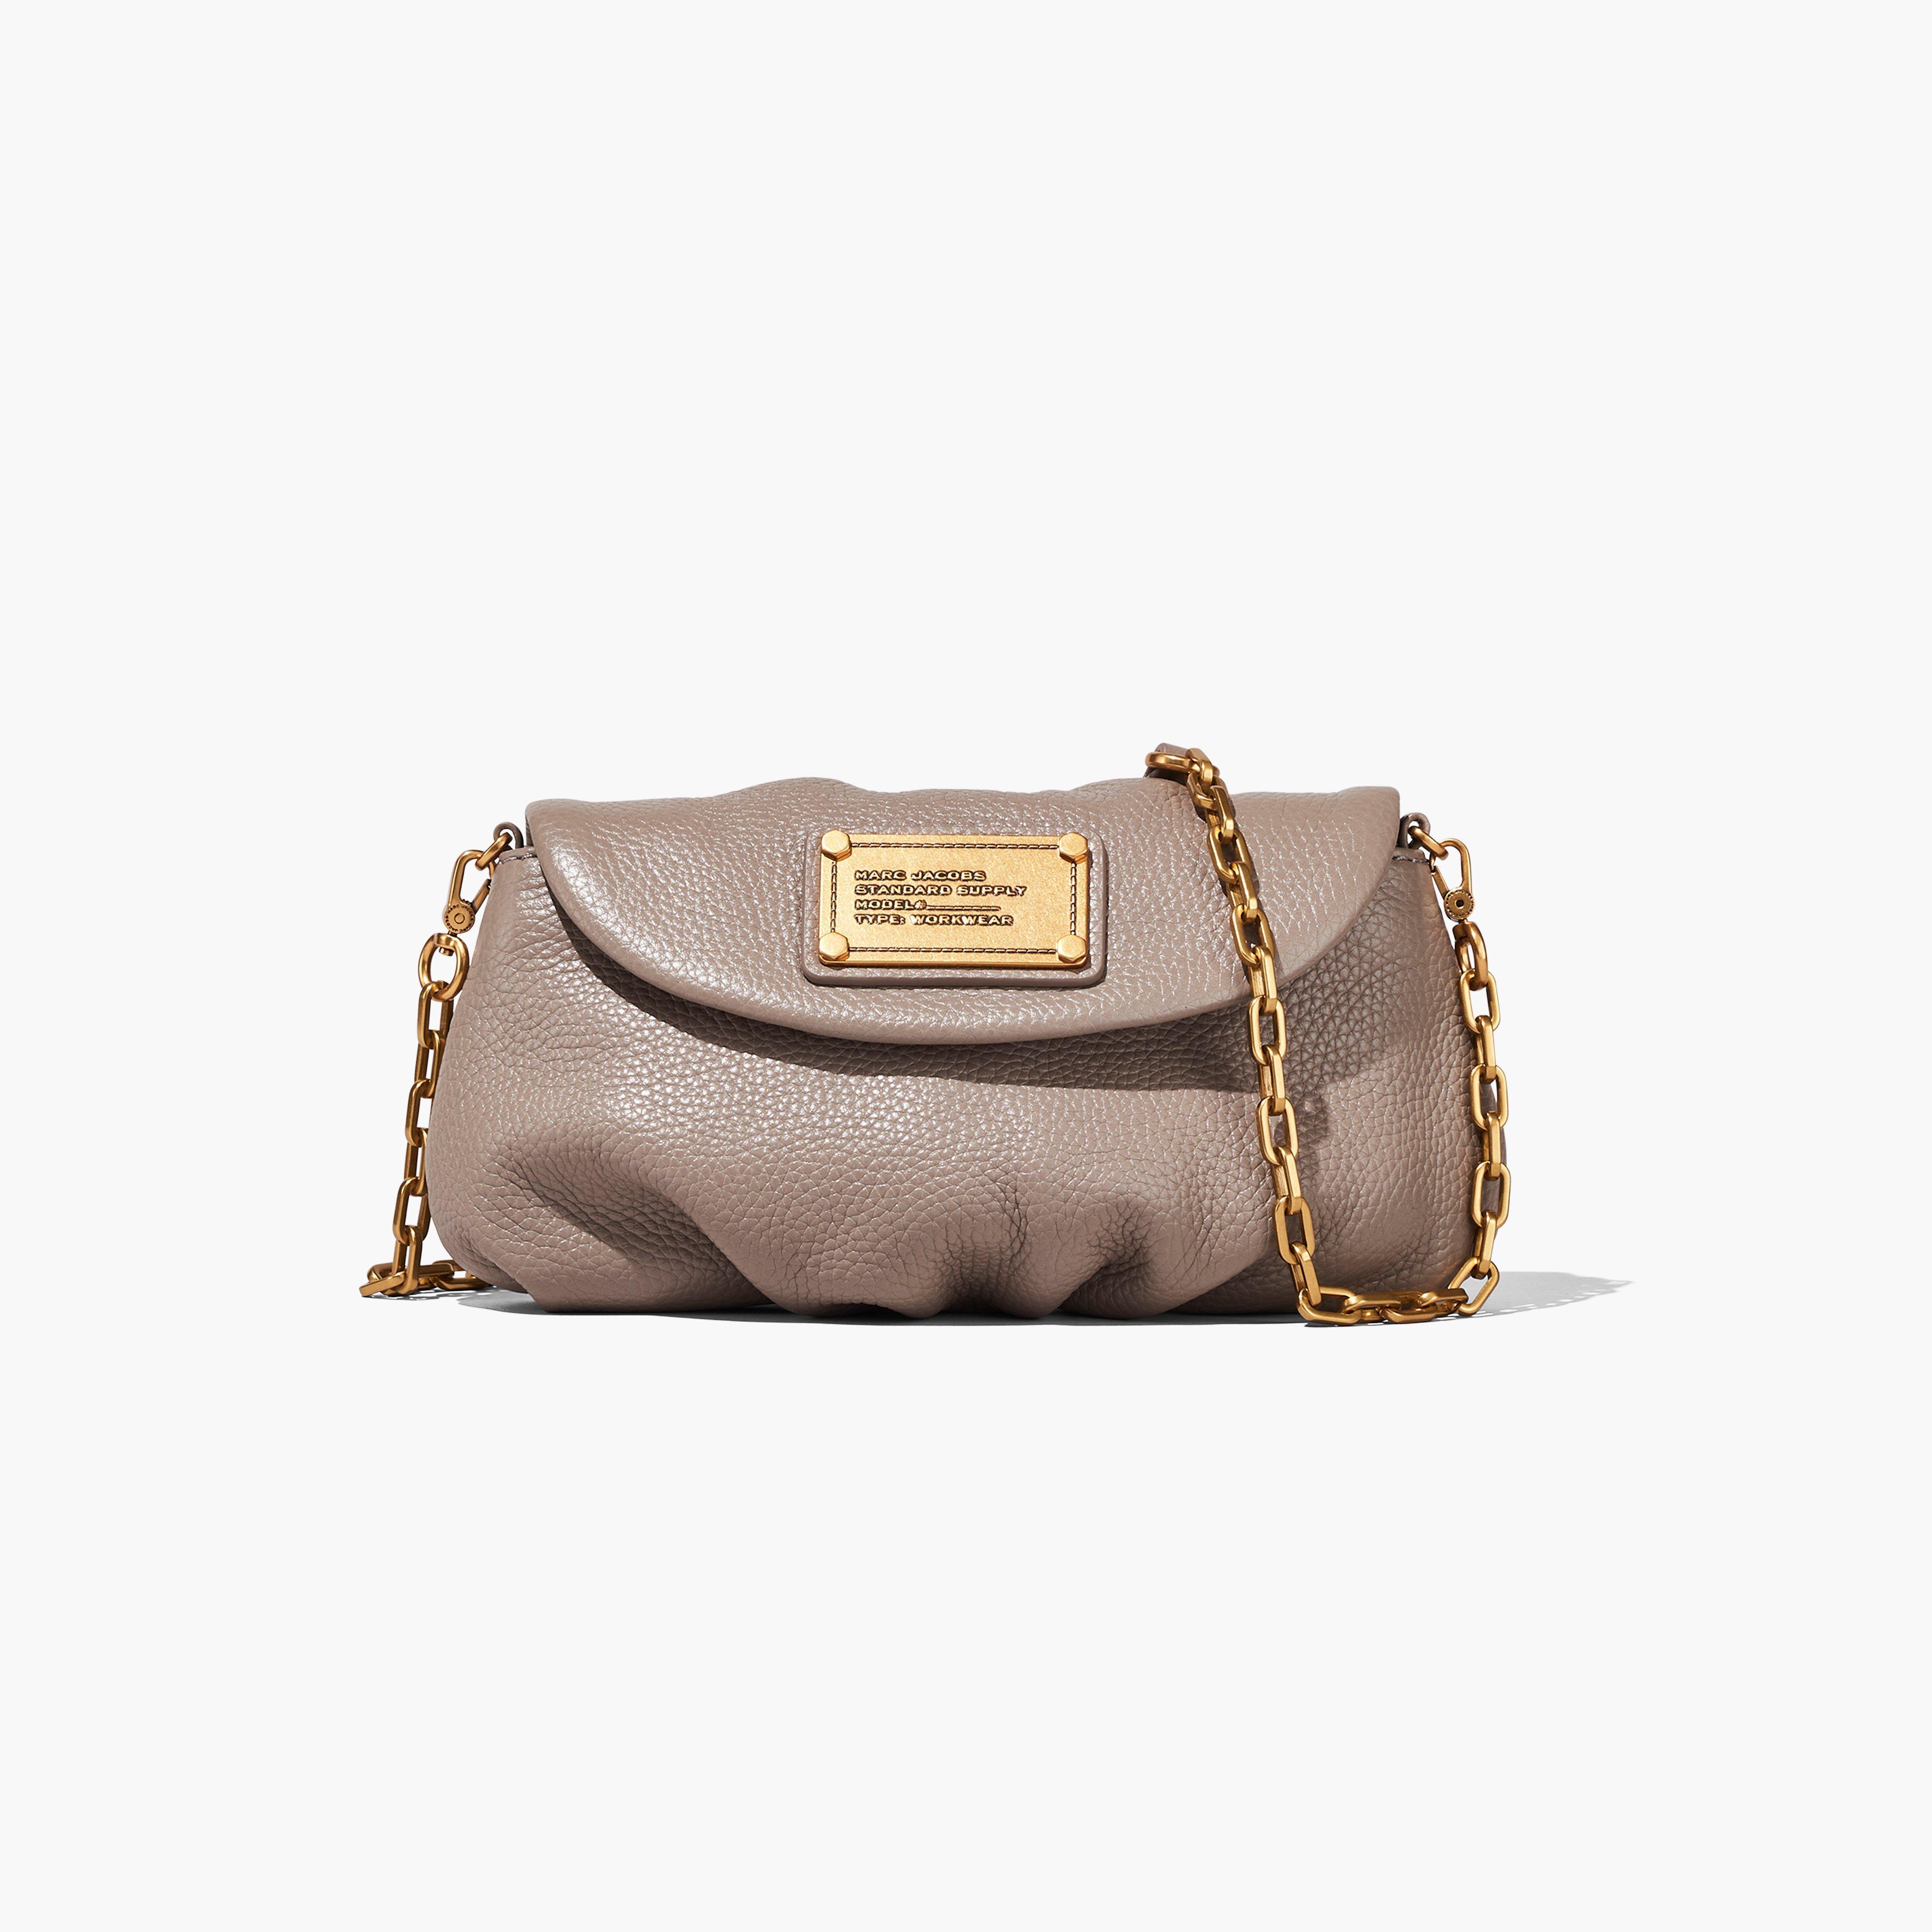 MARC JACOBS Limited Edition Crossbody Bags